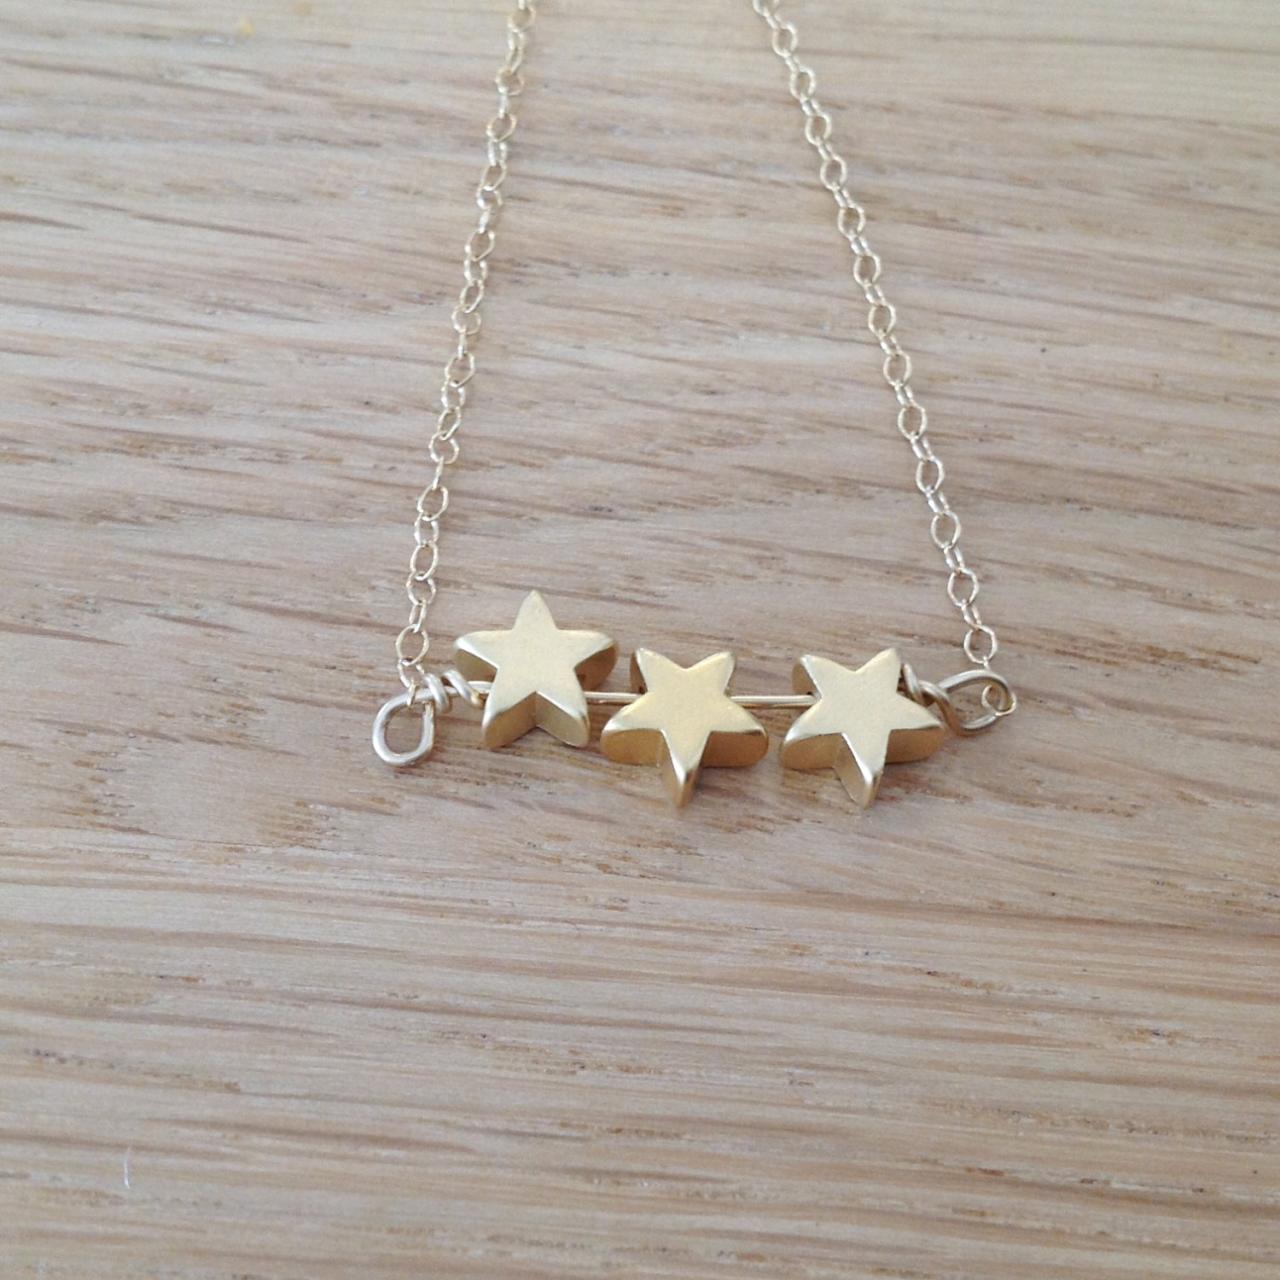 Star Necklace, Gold Necklace, Star Bead, Simple Necklace, Stars, Everyday Necklace, Tiny Gold Necklace, Petite Jewelry - D13